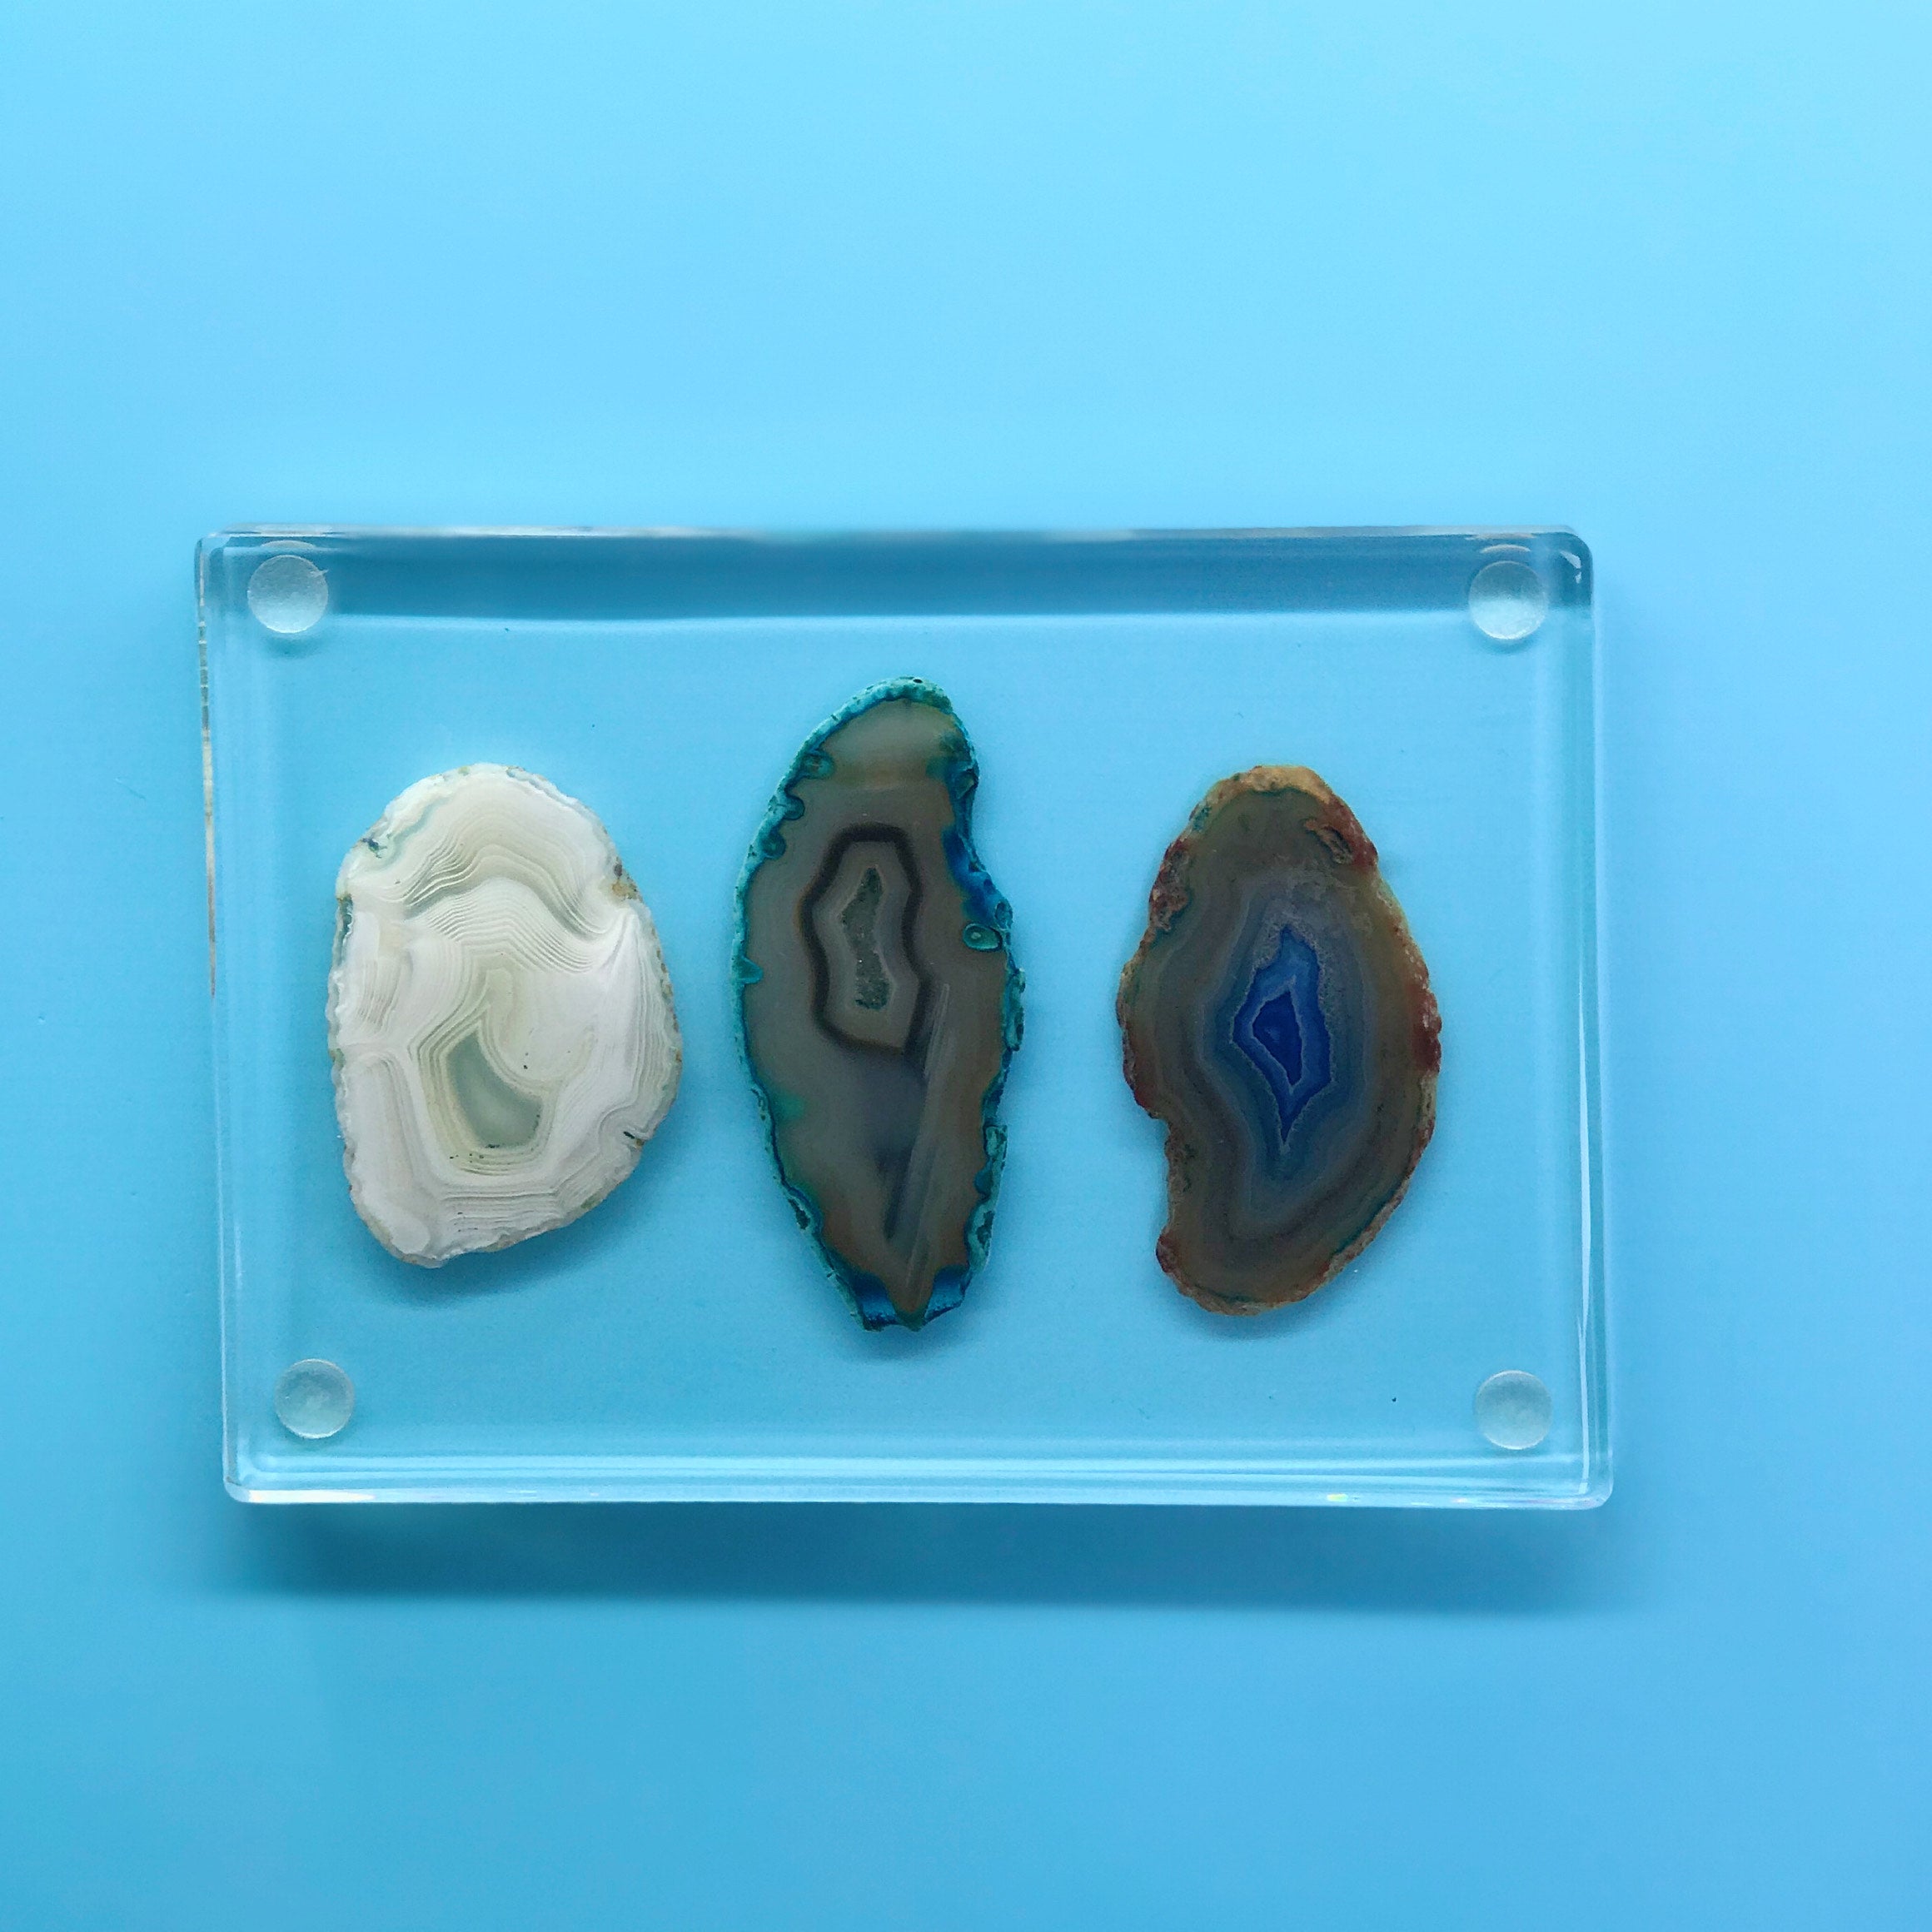 Natural Agate & Resin Tray - Cocus Pocus